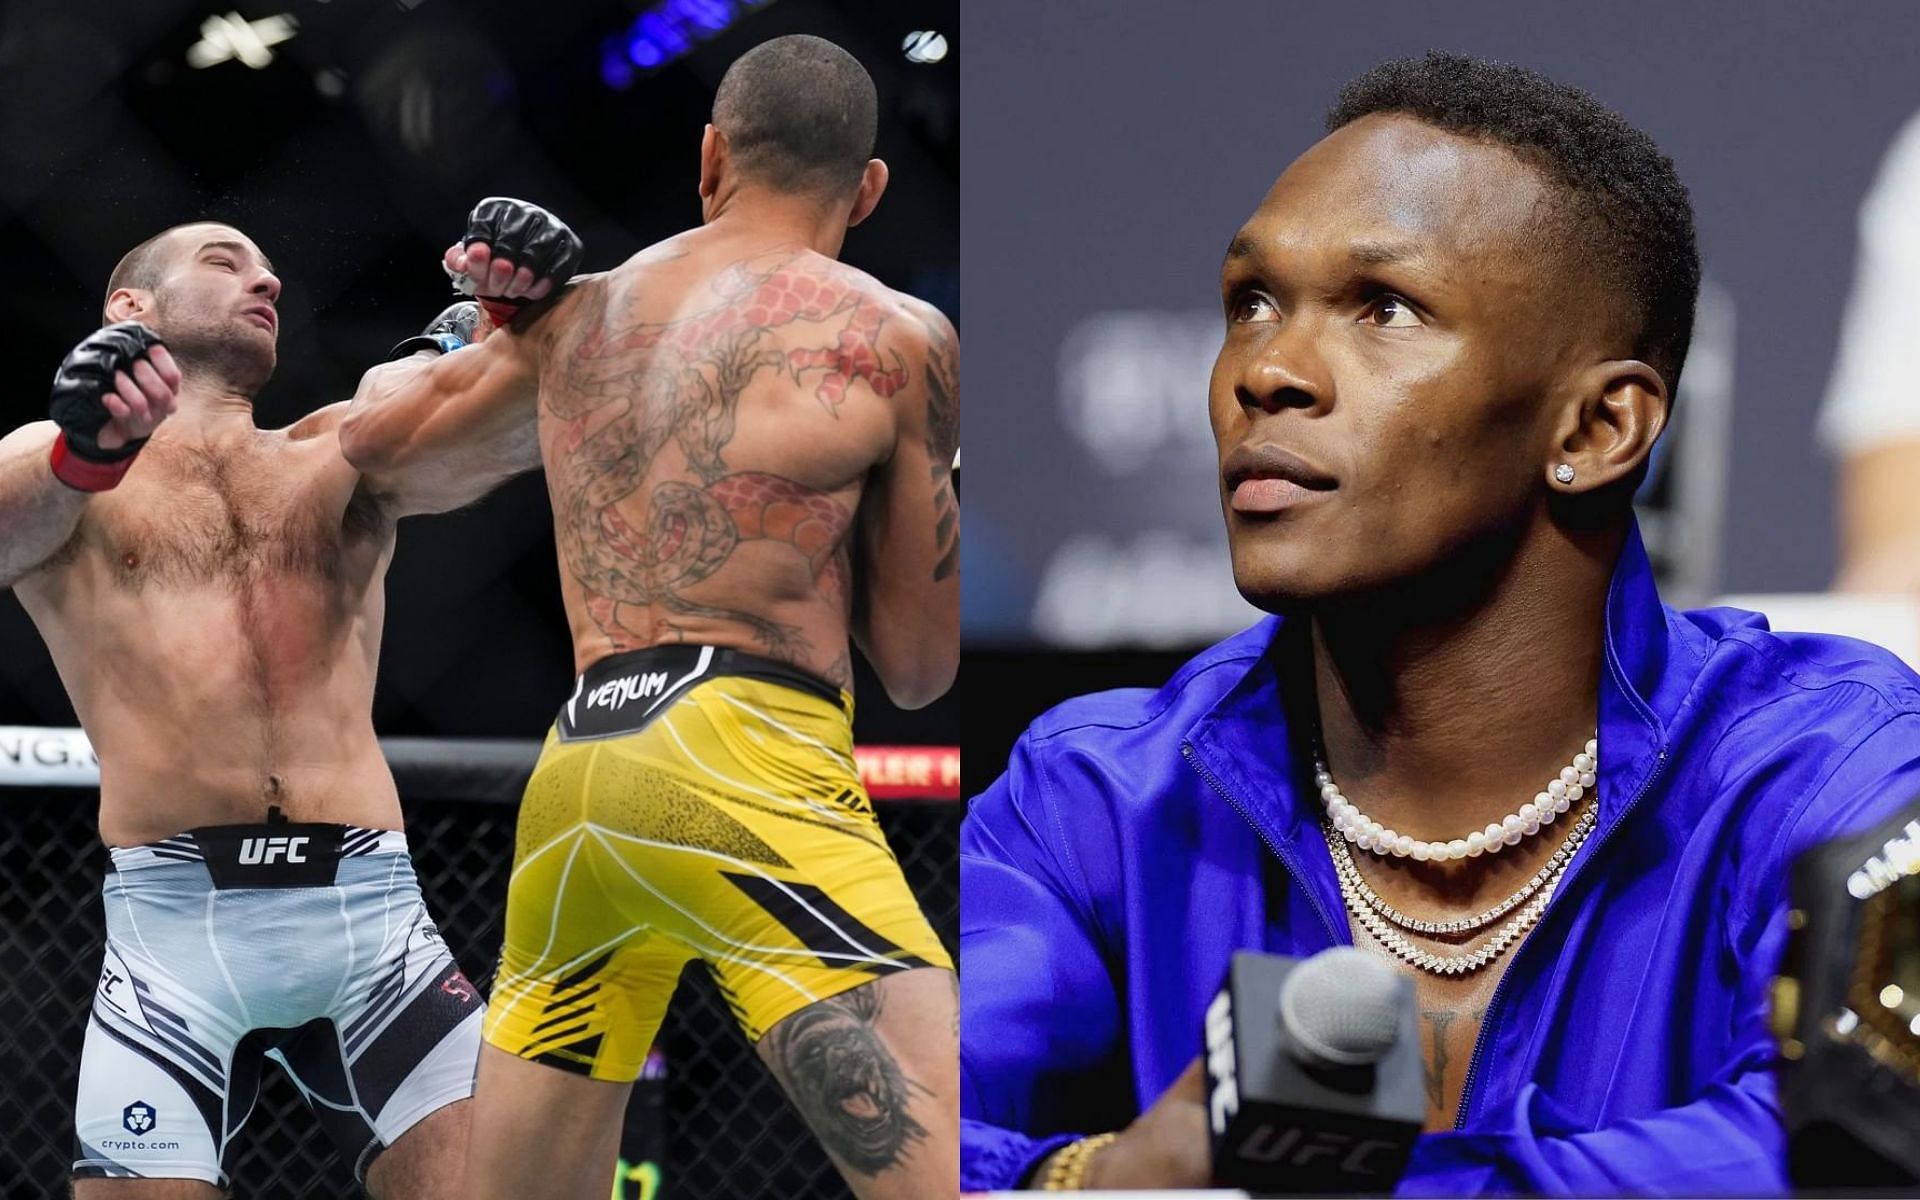 Sean Strickland vs. Alex Pereira (Left) and Israel Adesanya (Right) (Imges courtesy of @ufc Instagram and Getty)